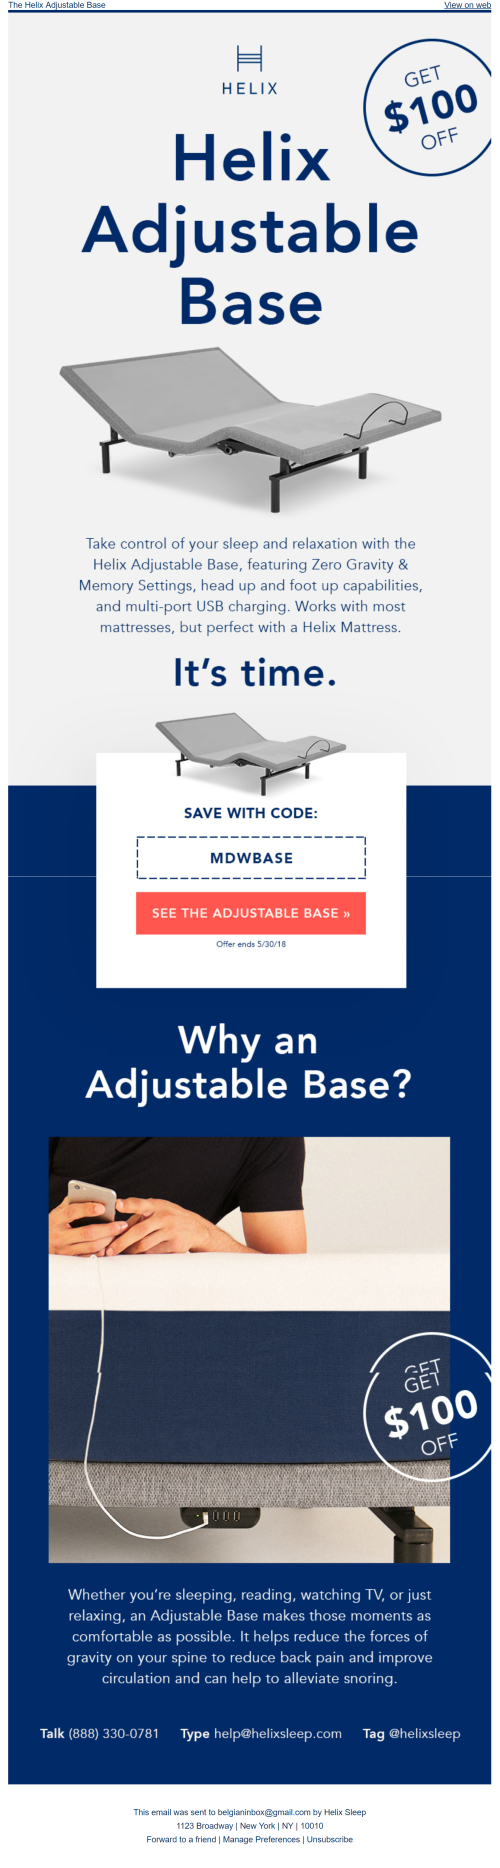 Product launch email - Adjustable base